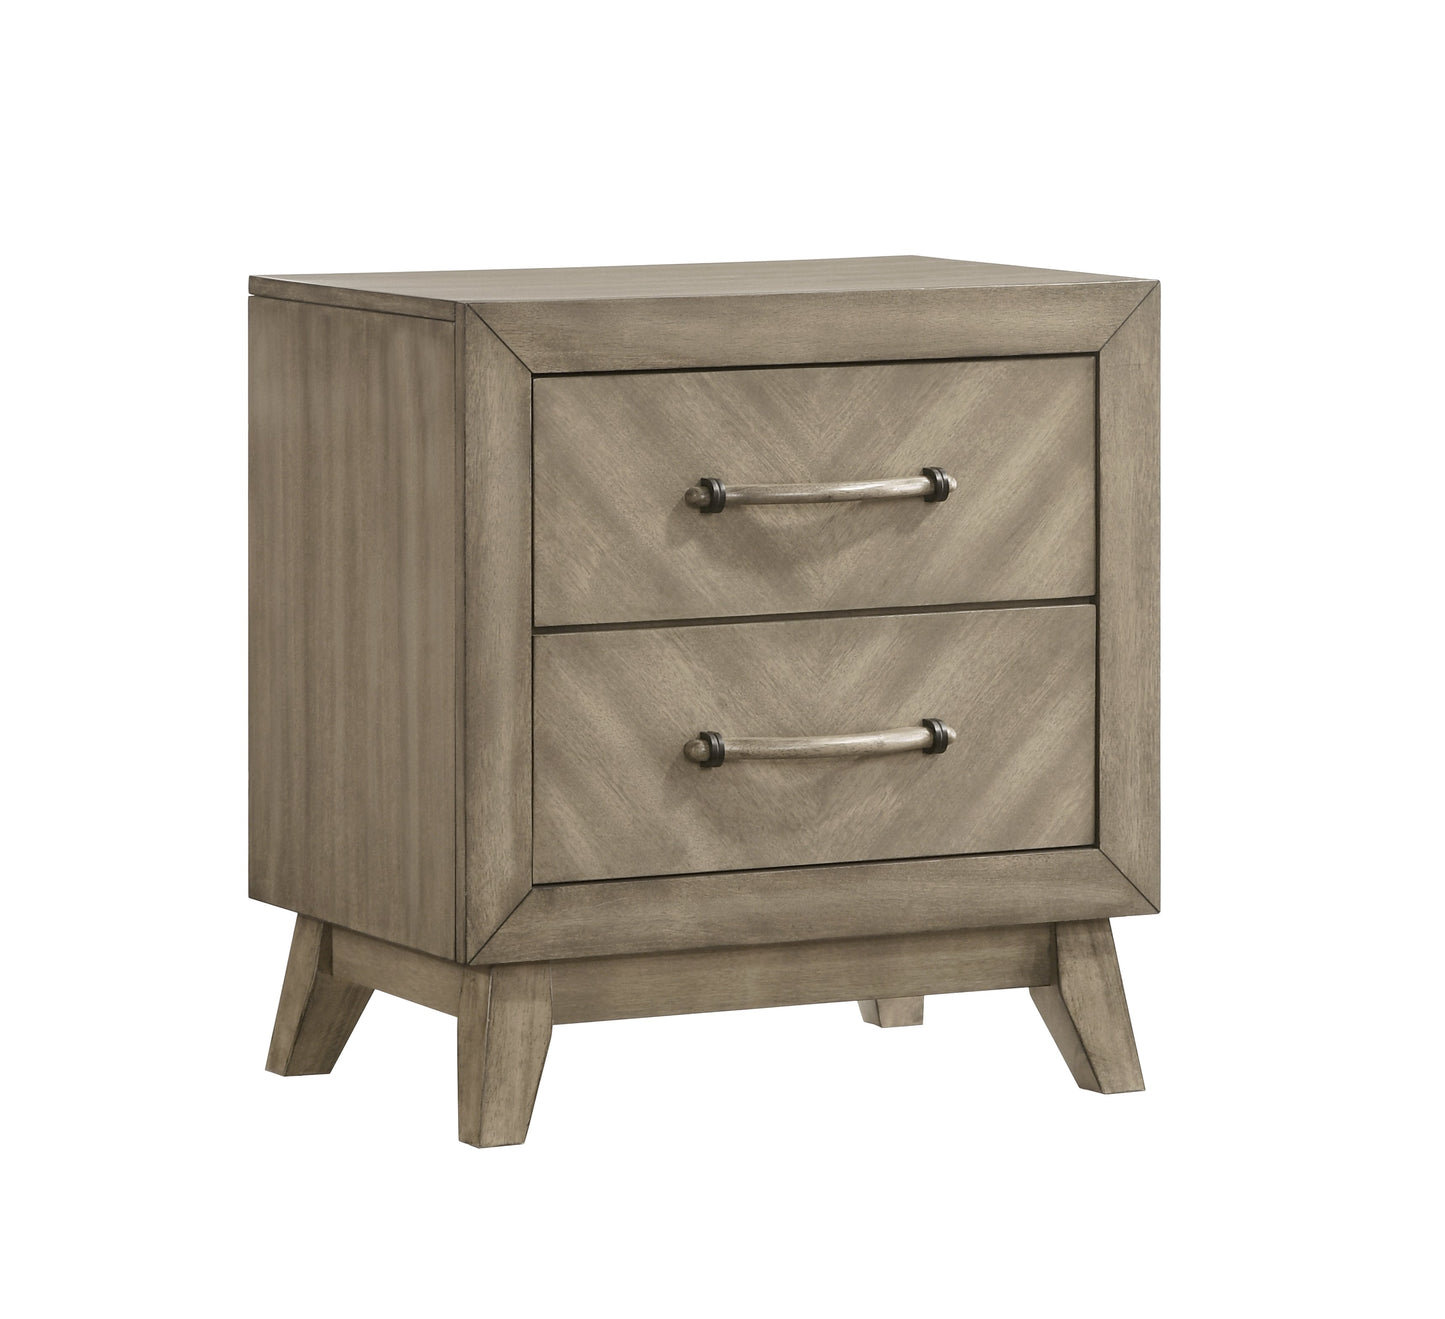 Roundhill Furniture Arena Contemporary Wood Bedroom Collection in Antique Gray